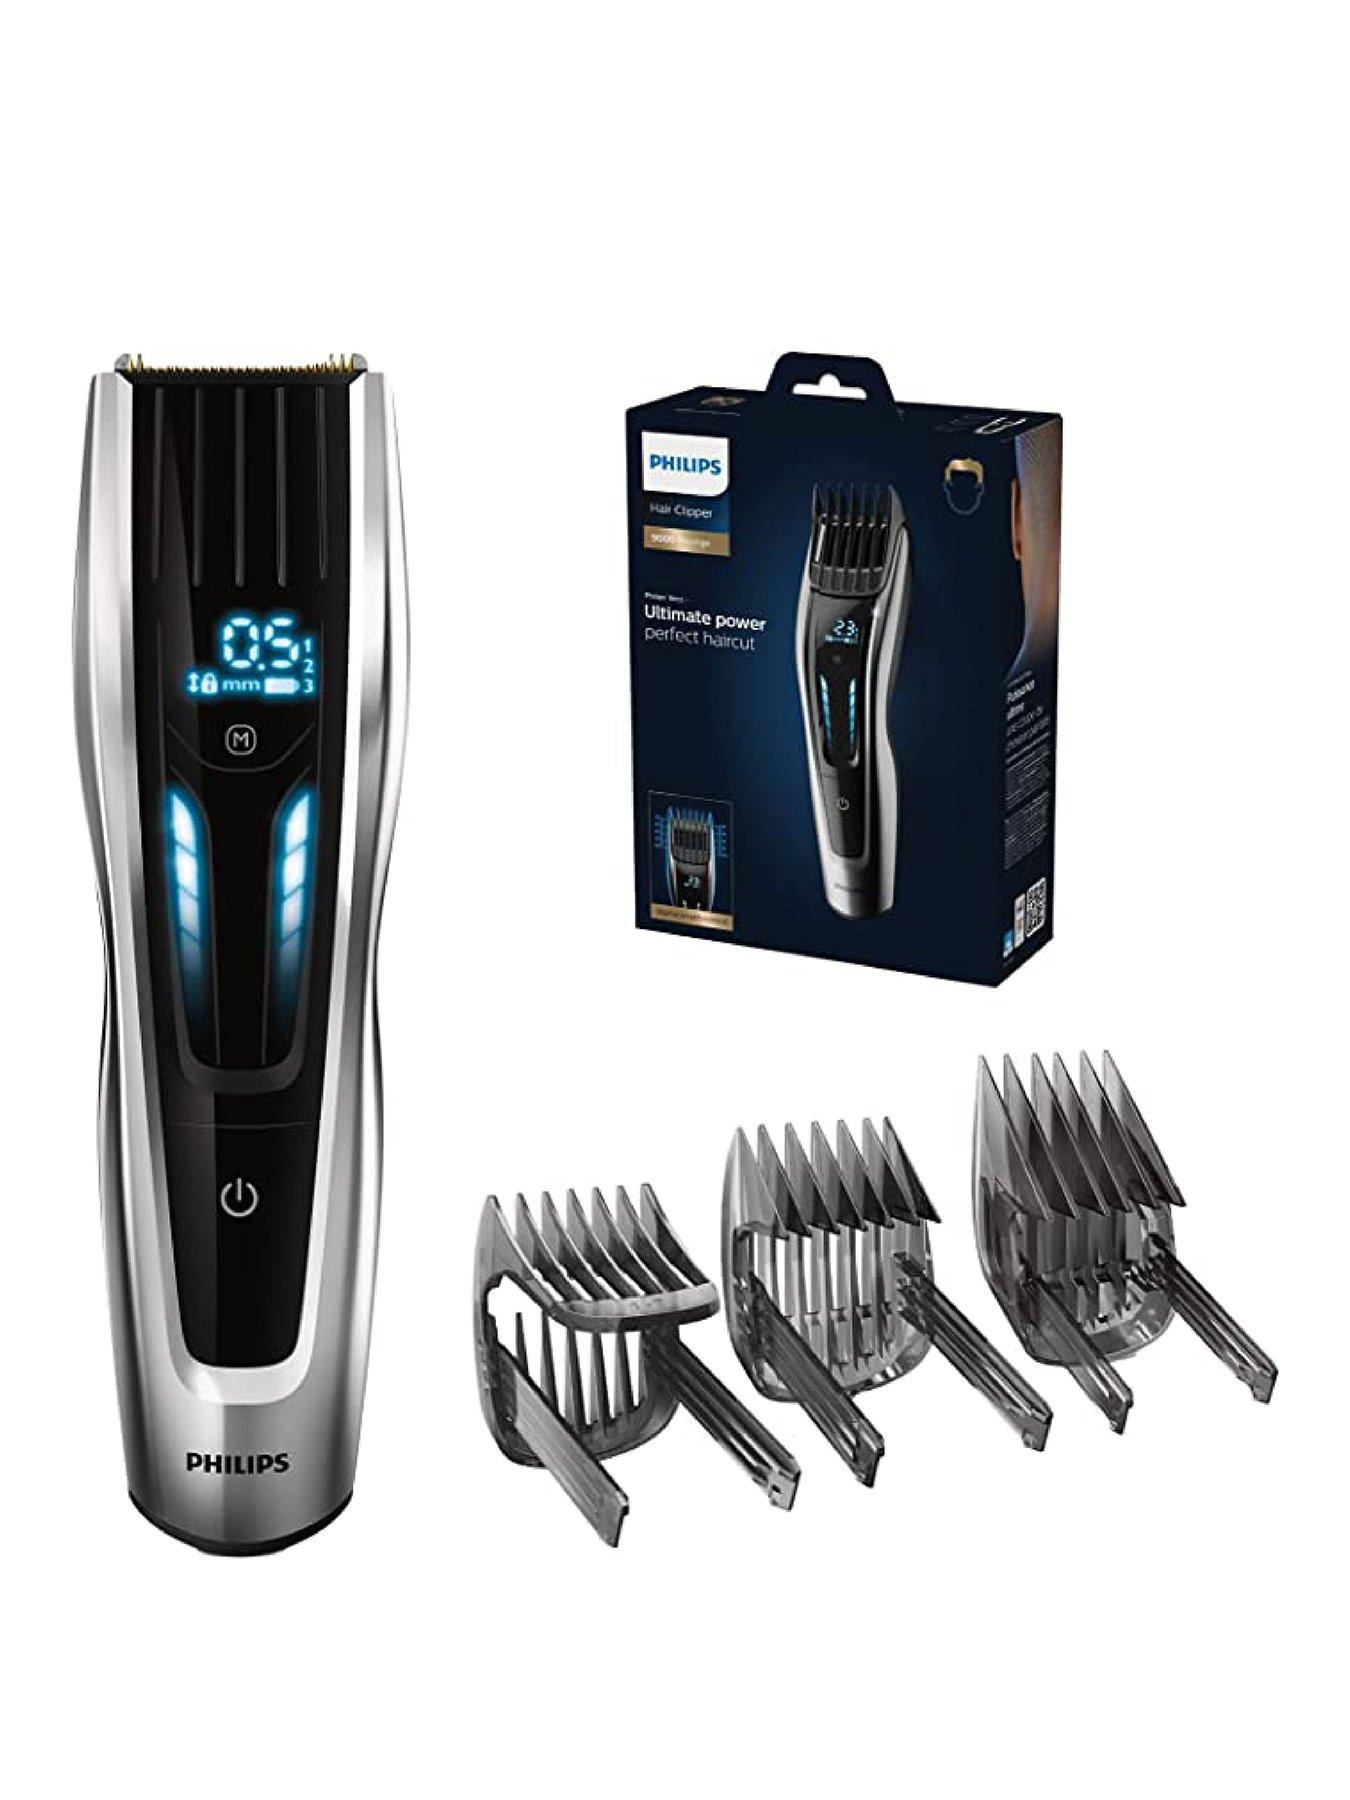 where to buy clippers and trimmers